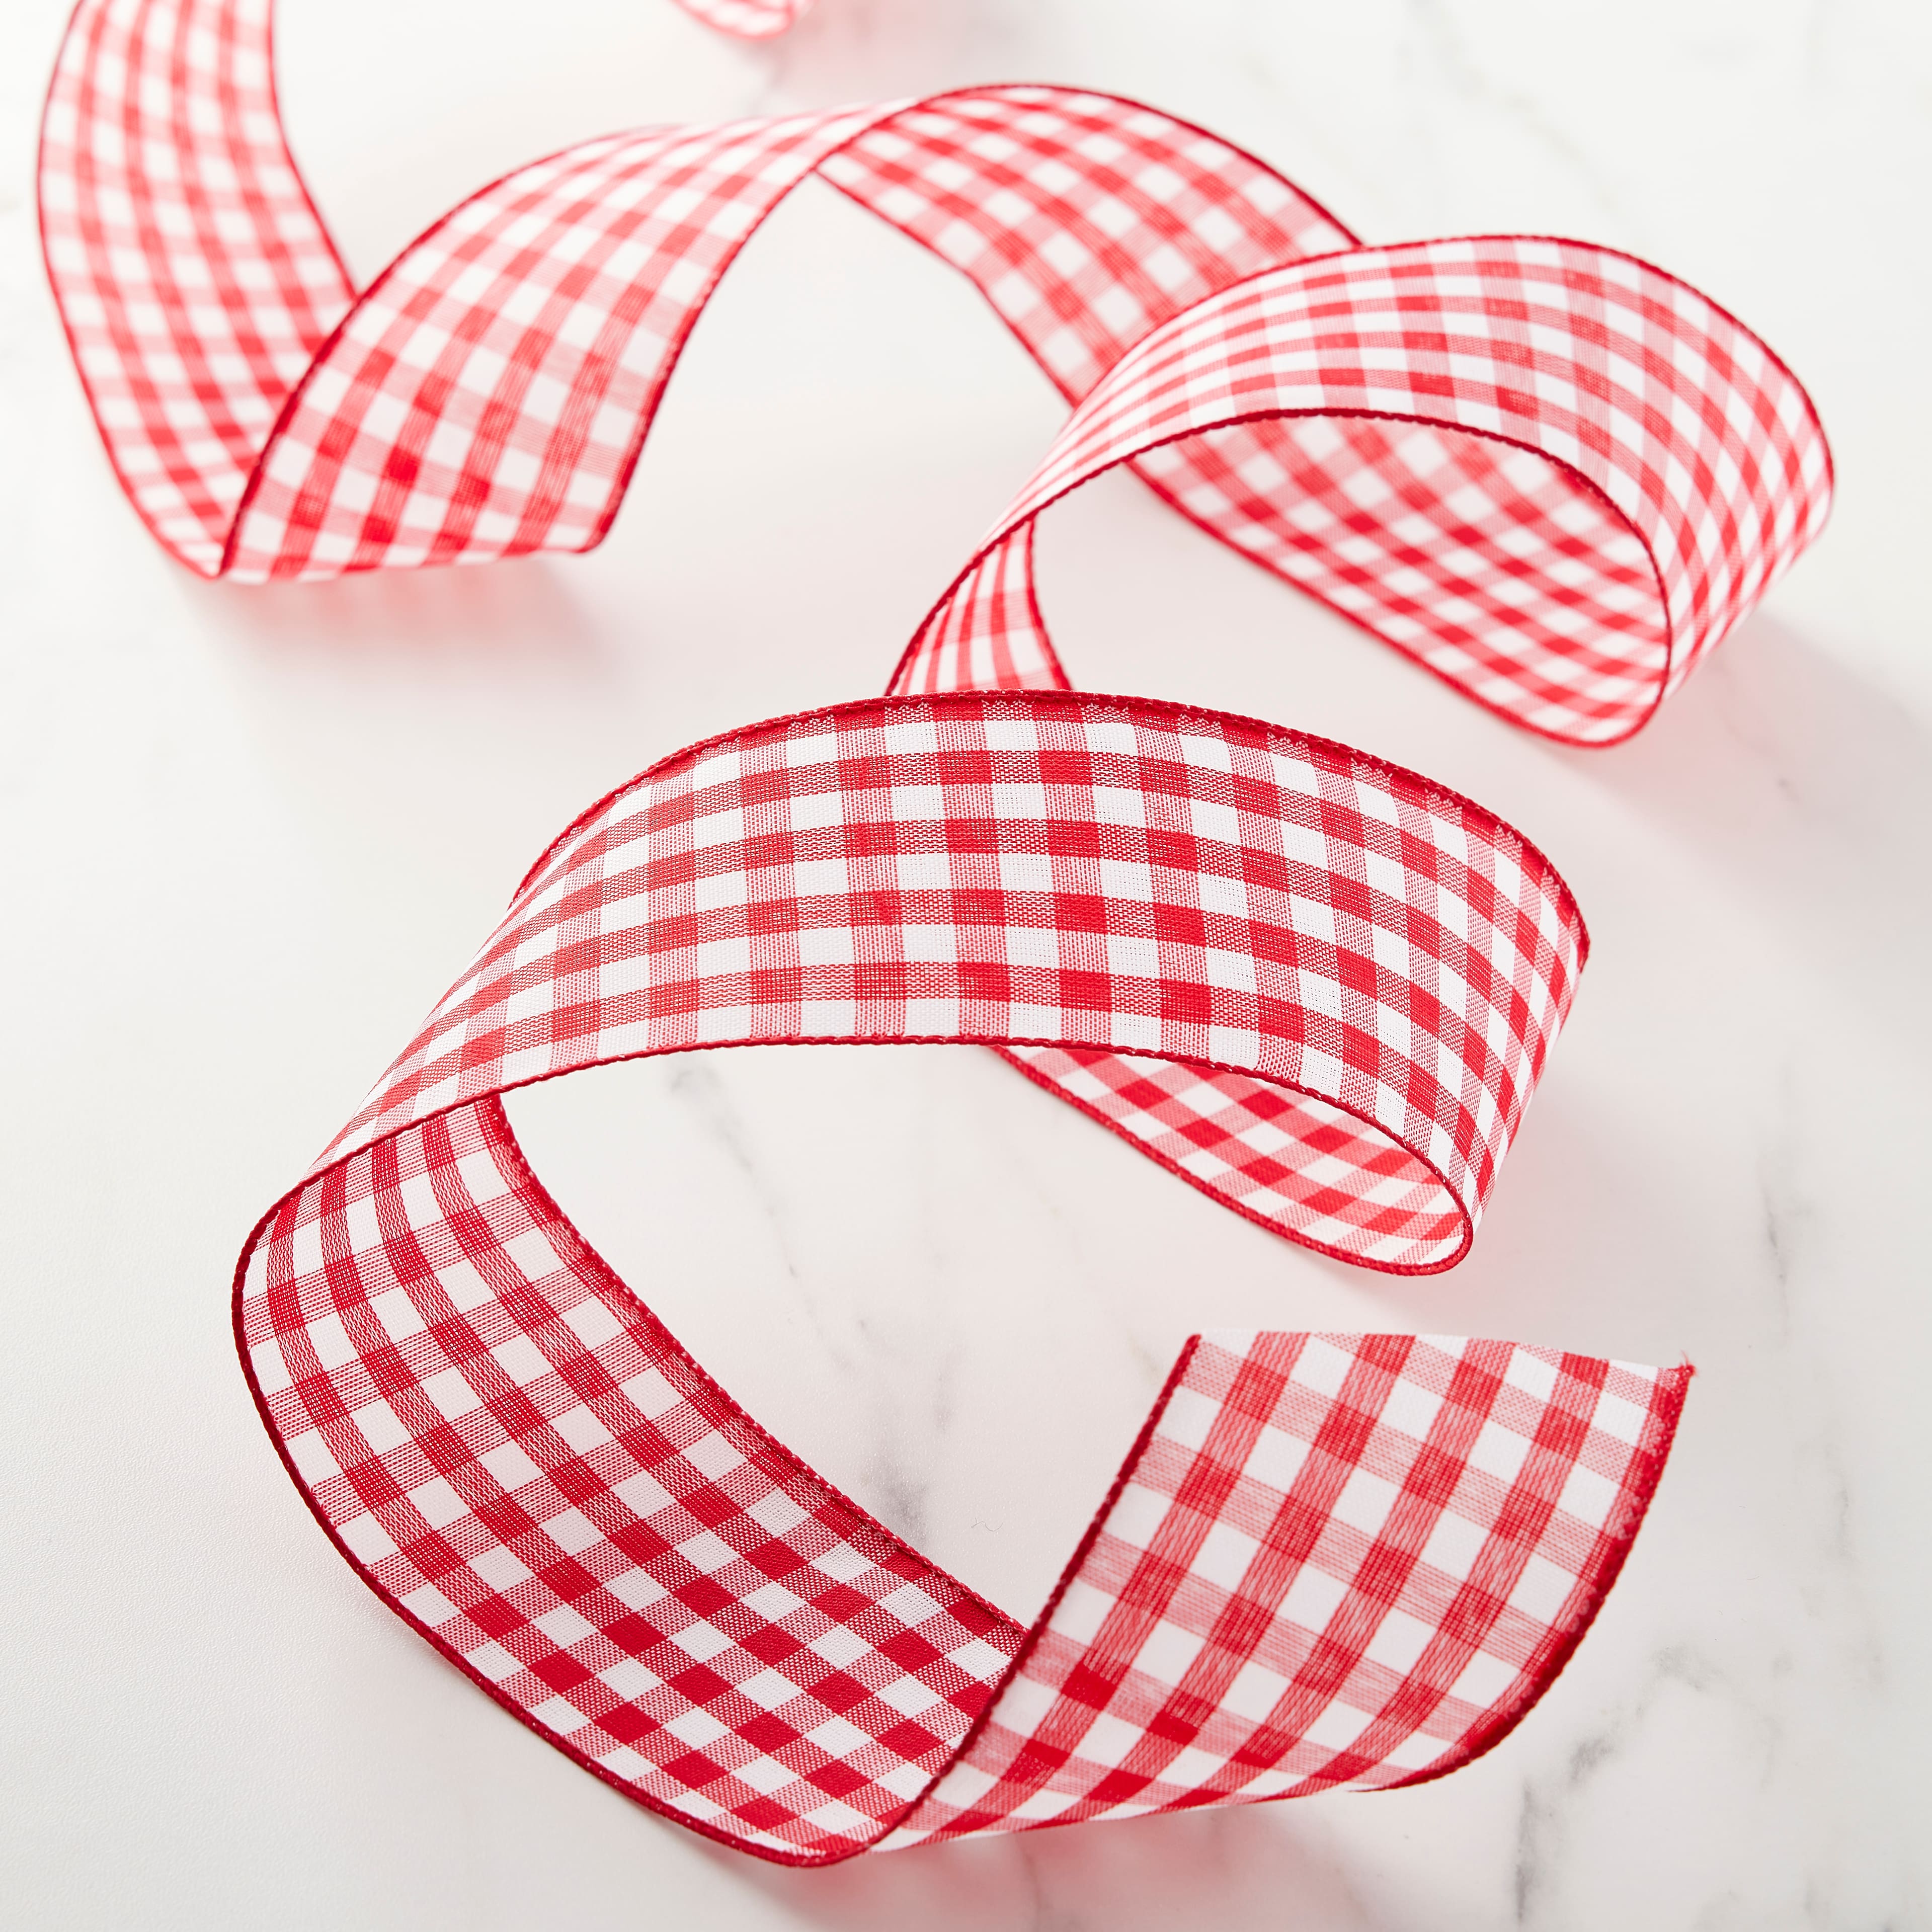 5 Yards Red and White Large Gingham Checked Wired Ribbon 2 1/2W